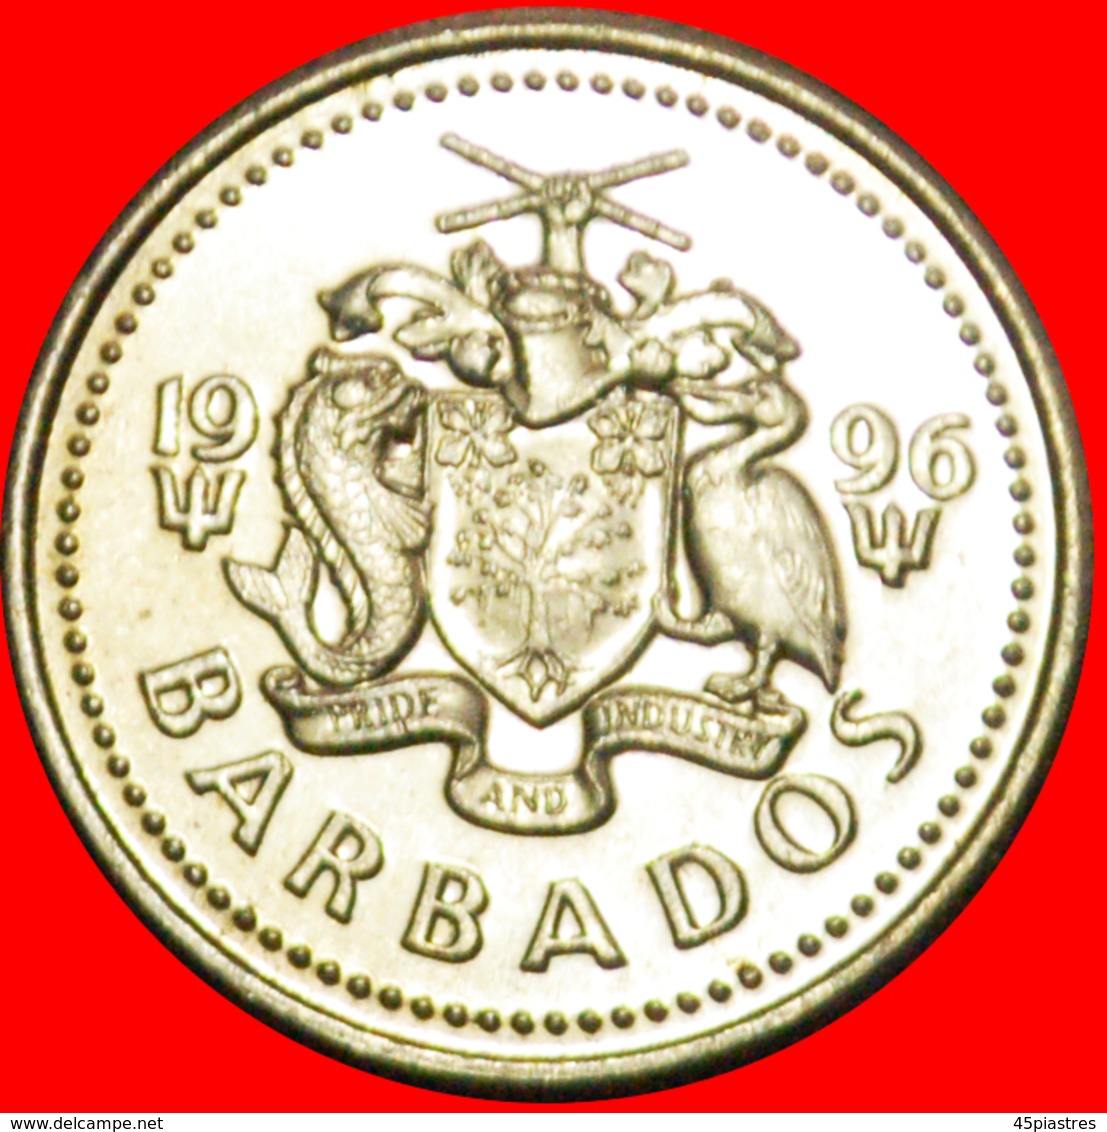 + GREAT BRITAIN (1973-2005): BARBADOS ★ 10 CENTS 1996 MINT LUSTER★DISCOVERY COIN! LOW START ★ NO RESERVE! - Barbados (Barbuda)